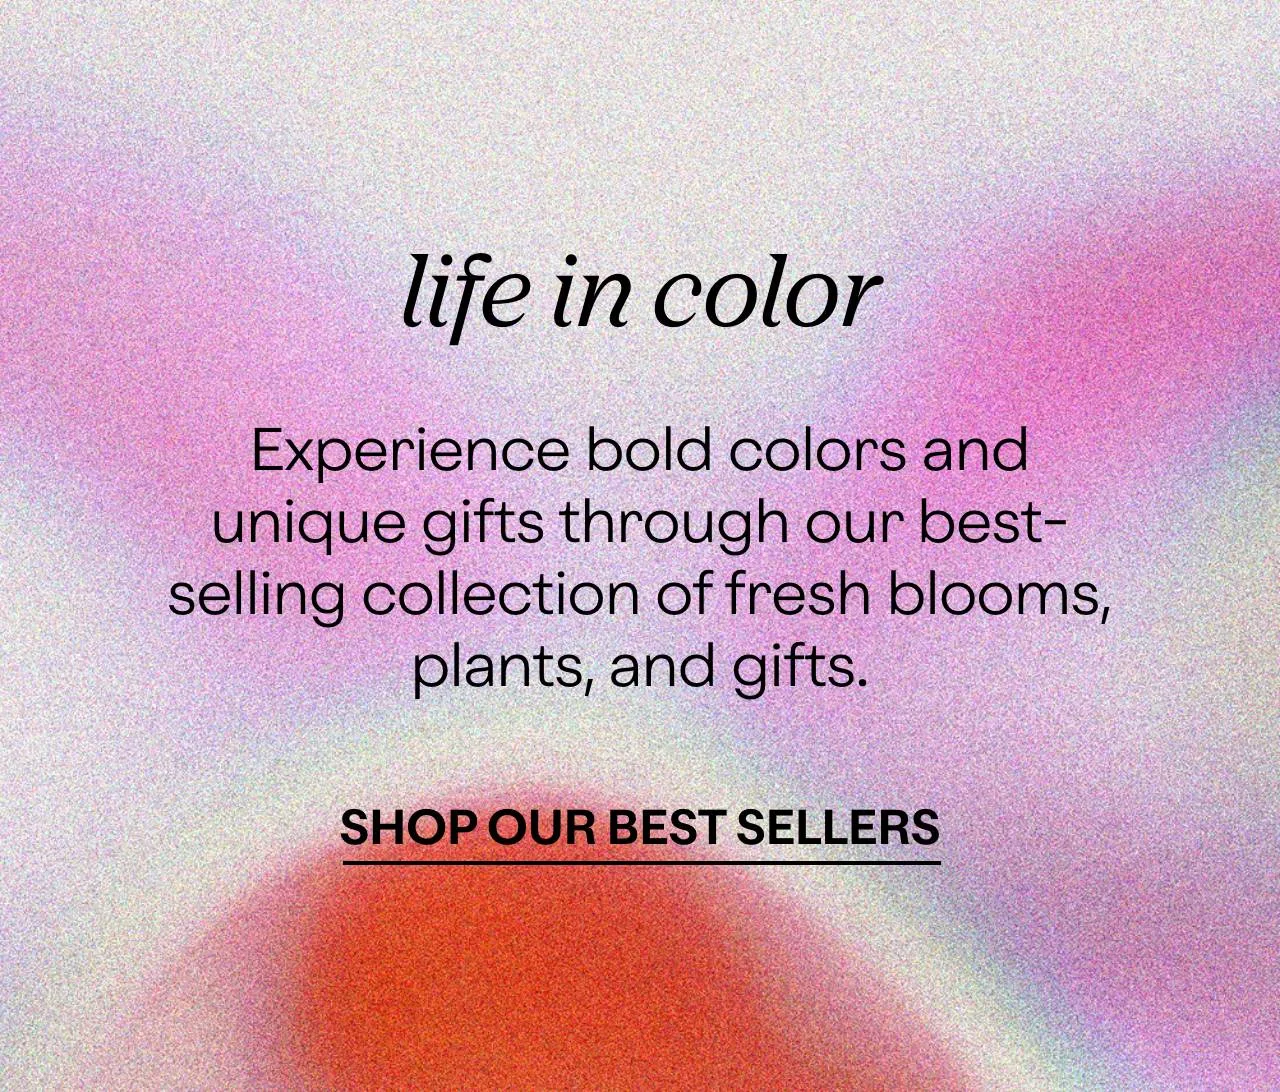 life in color Experience the power of bold colors and unique varietals through our latest collection of fresh blooms.  LIFE IN COLOR